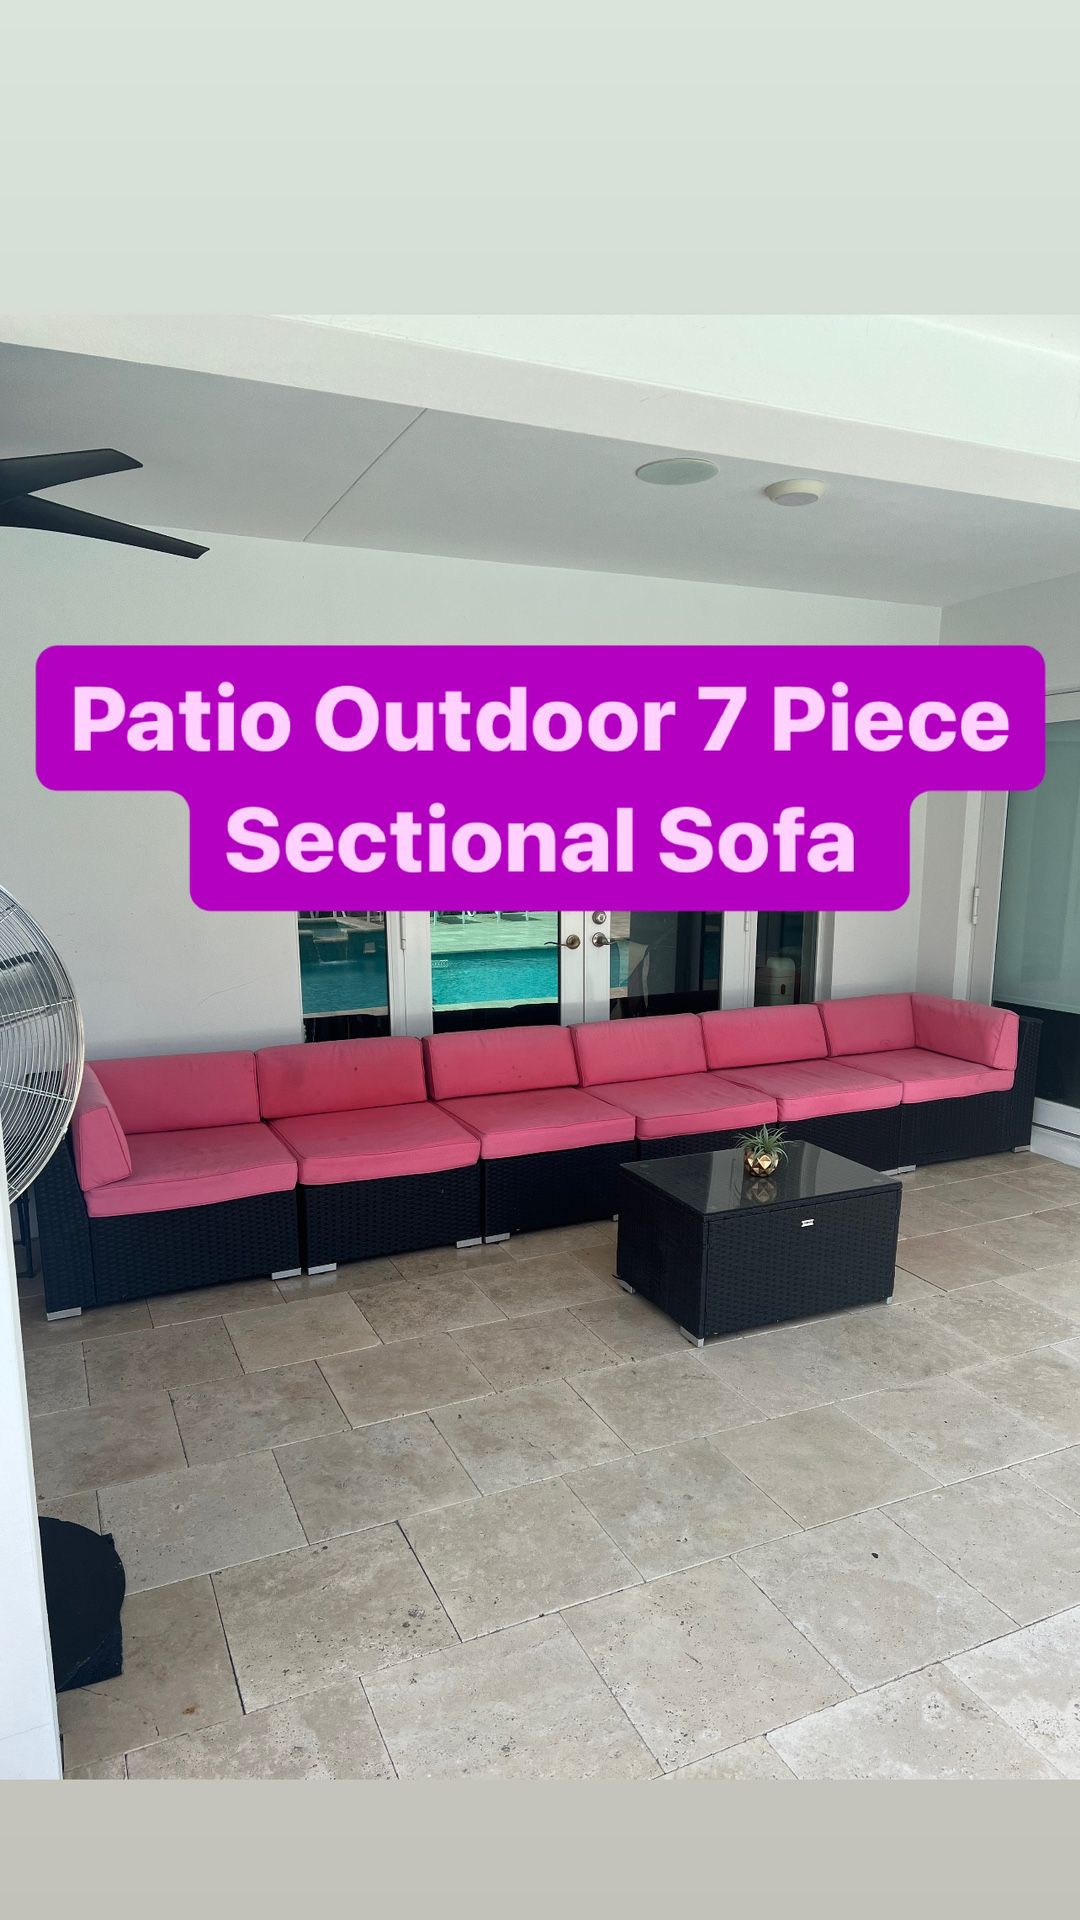 Kinbor Patio Outdoor 7 Pieces Sectional Sofa With Table (Serious Buyers Only)